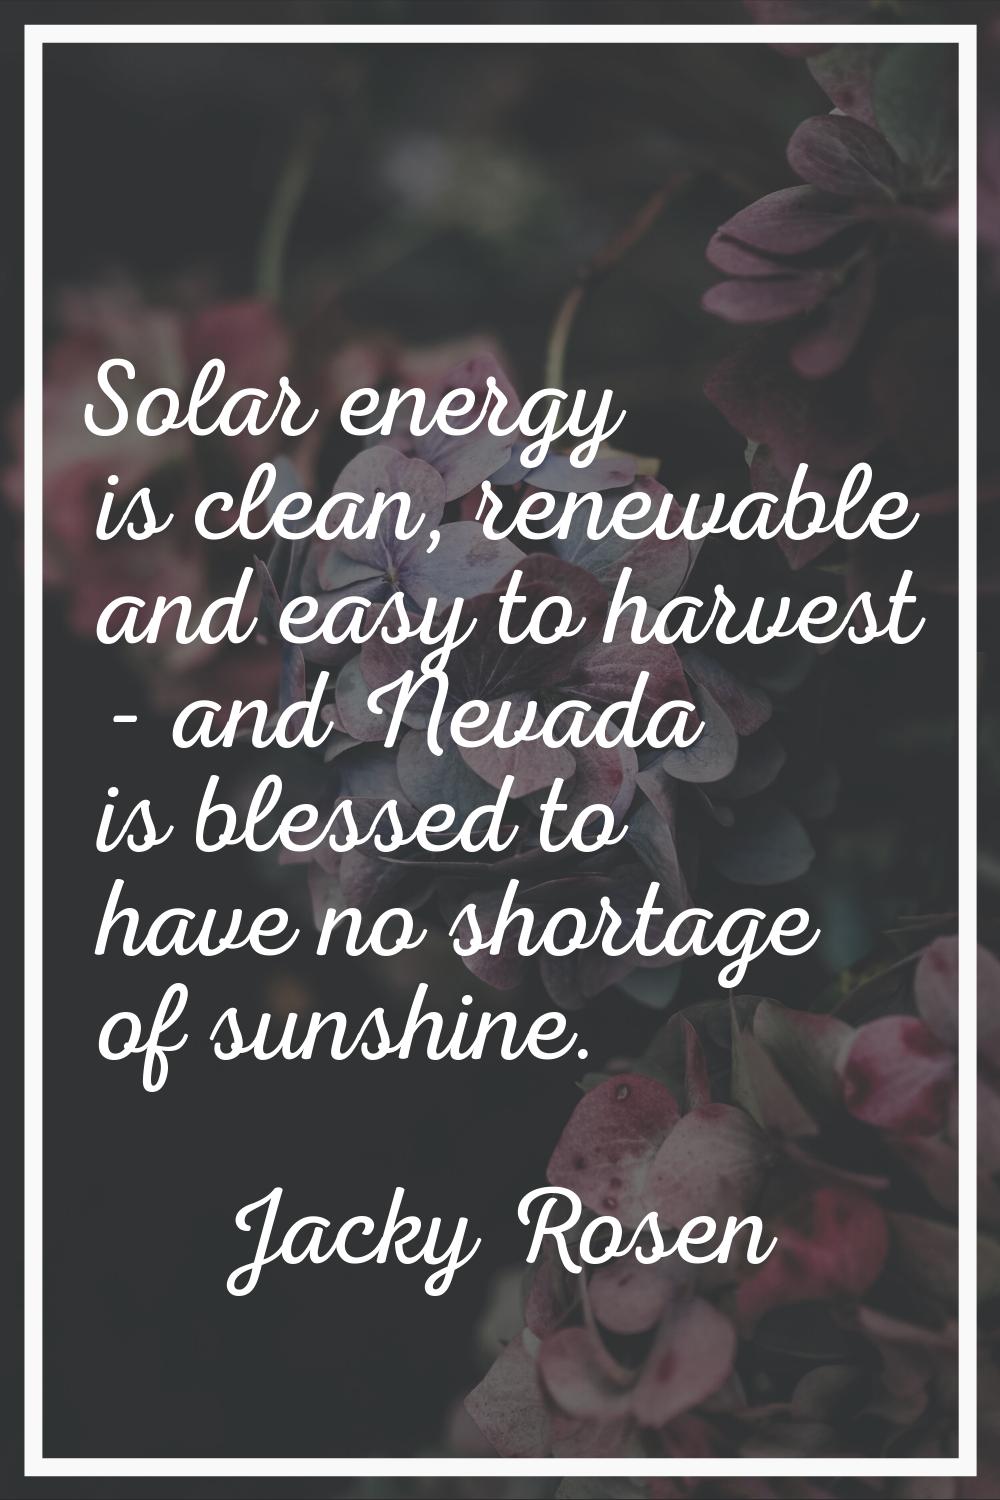 Solar energy is clean, renewable and easy to harvest - and Nevada is blessed to have no shortage of